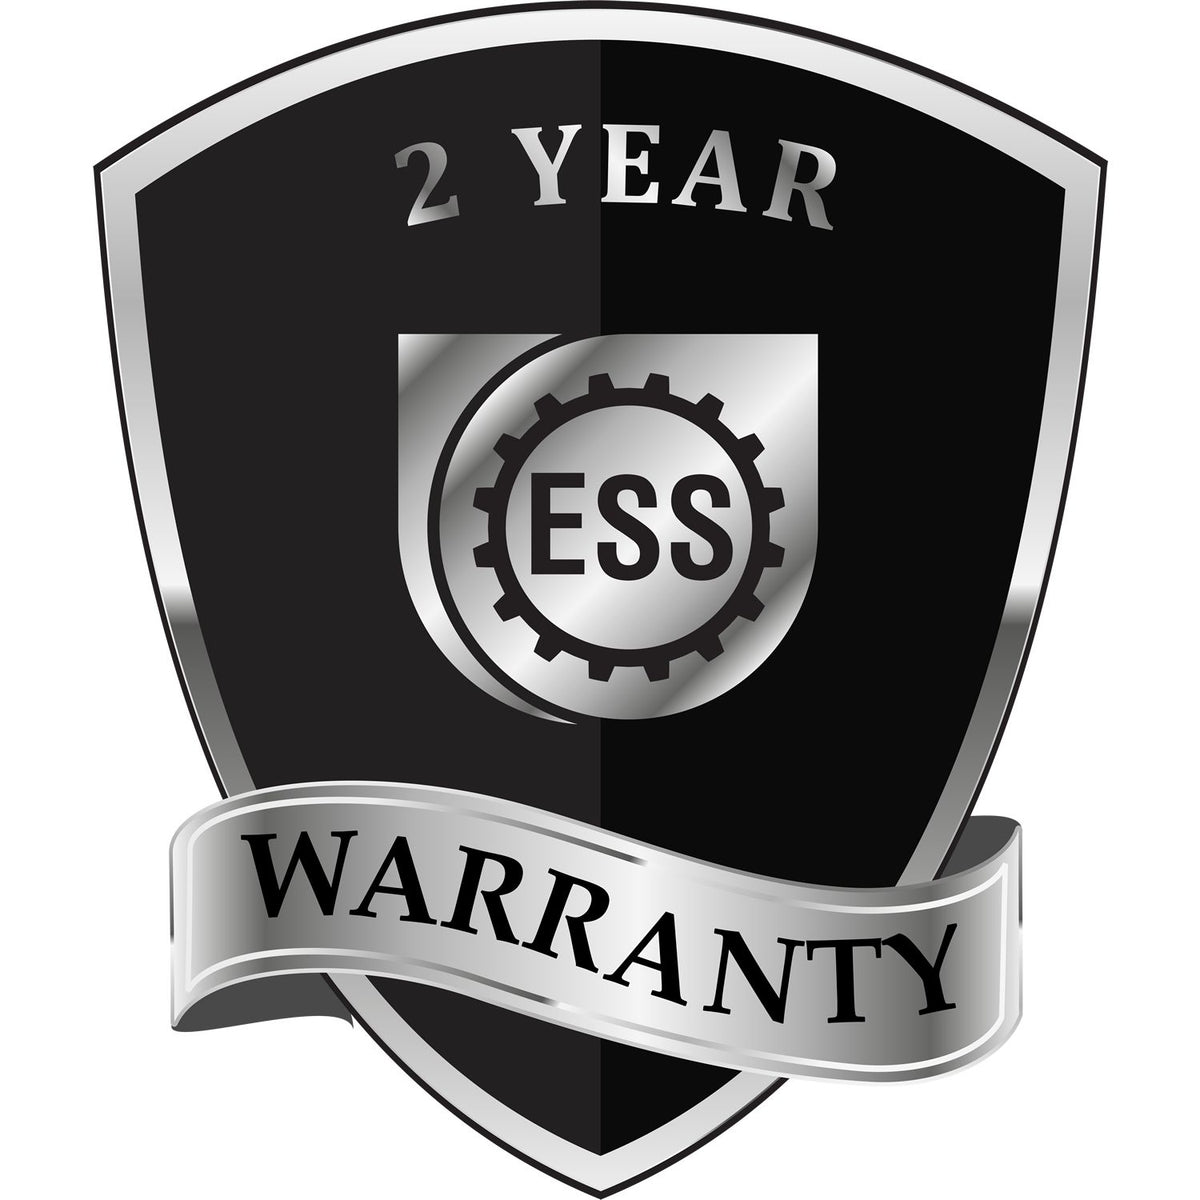 A black and silver badge or emblem showing warranty information for the Heavy Duty Cast Iron Georgia Geologist Seal Embosser